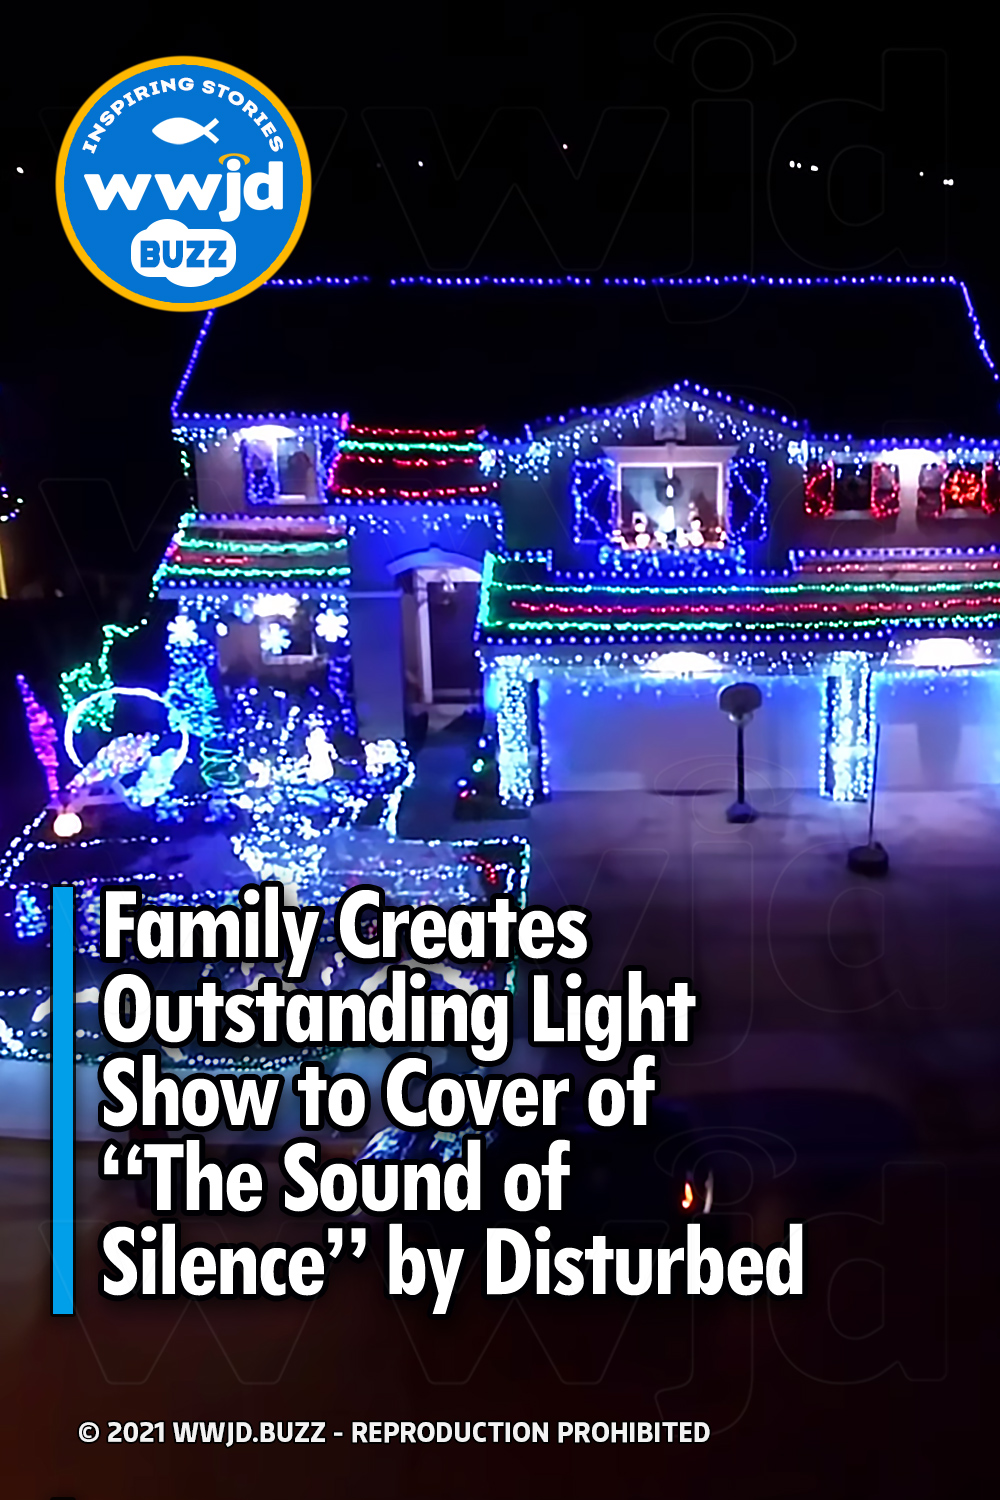 Family Creates Outstanding Light Show to Cover of “The Sound of Silence” by Disturbed